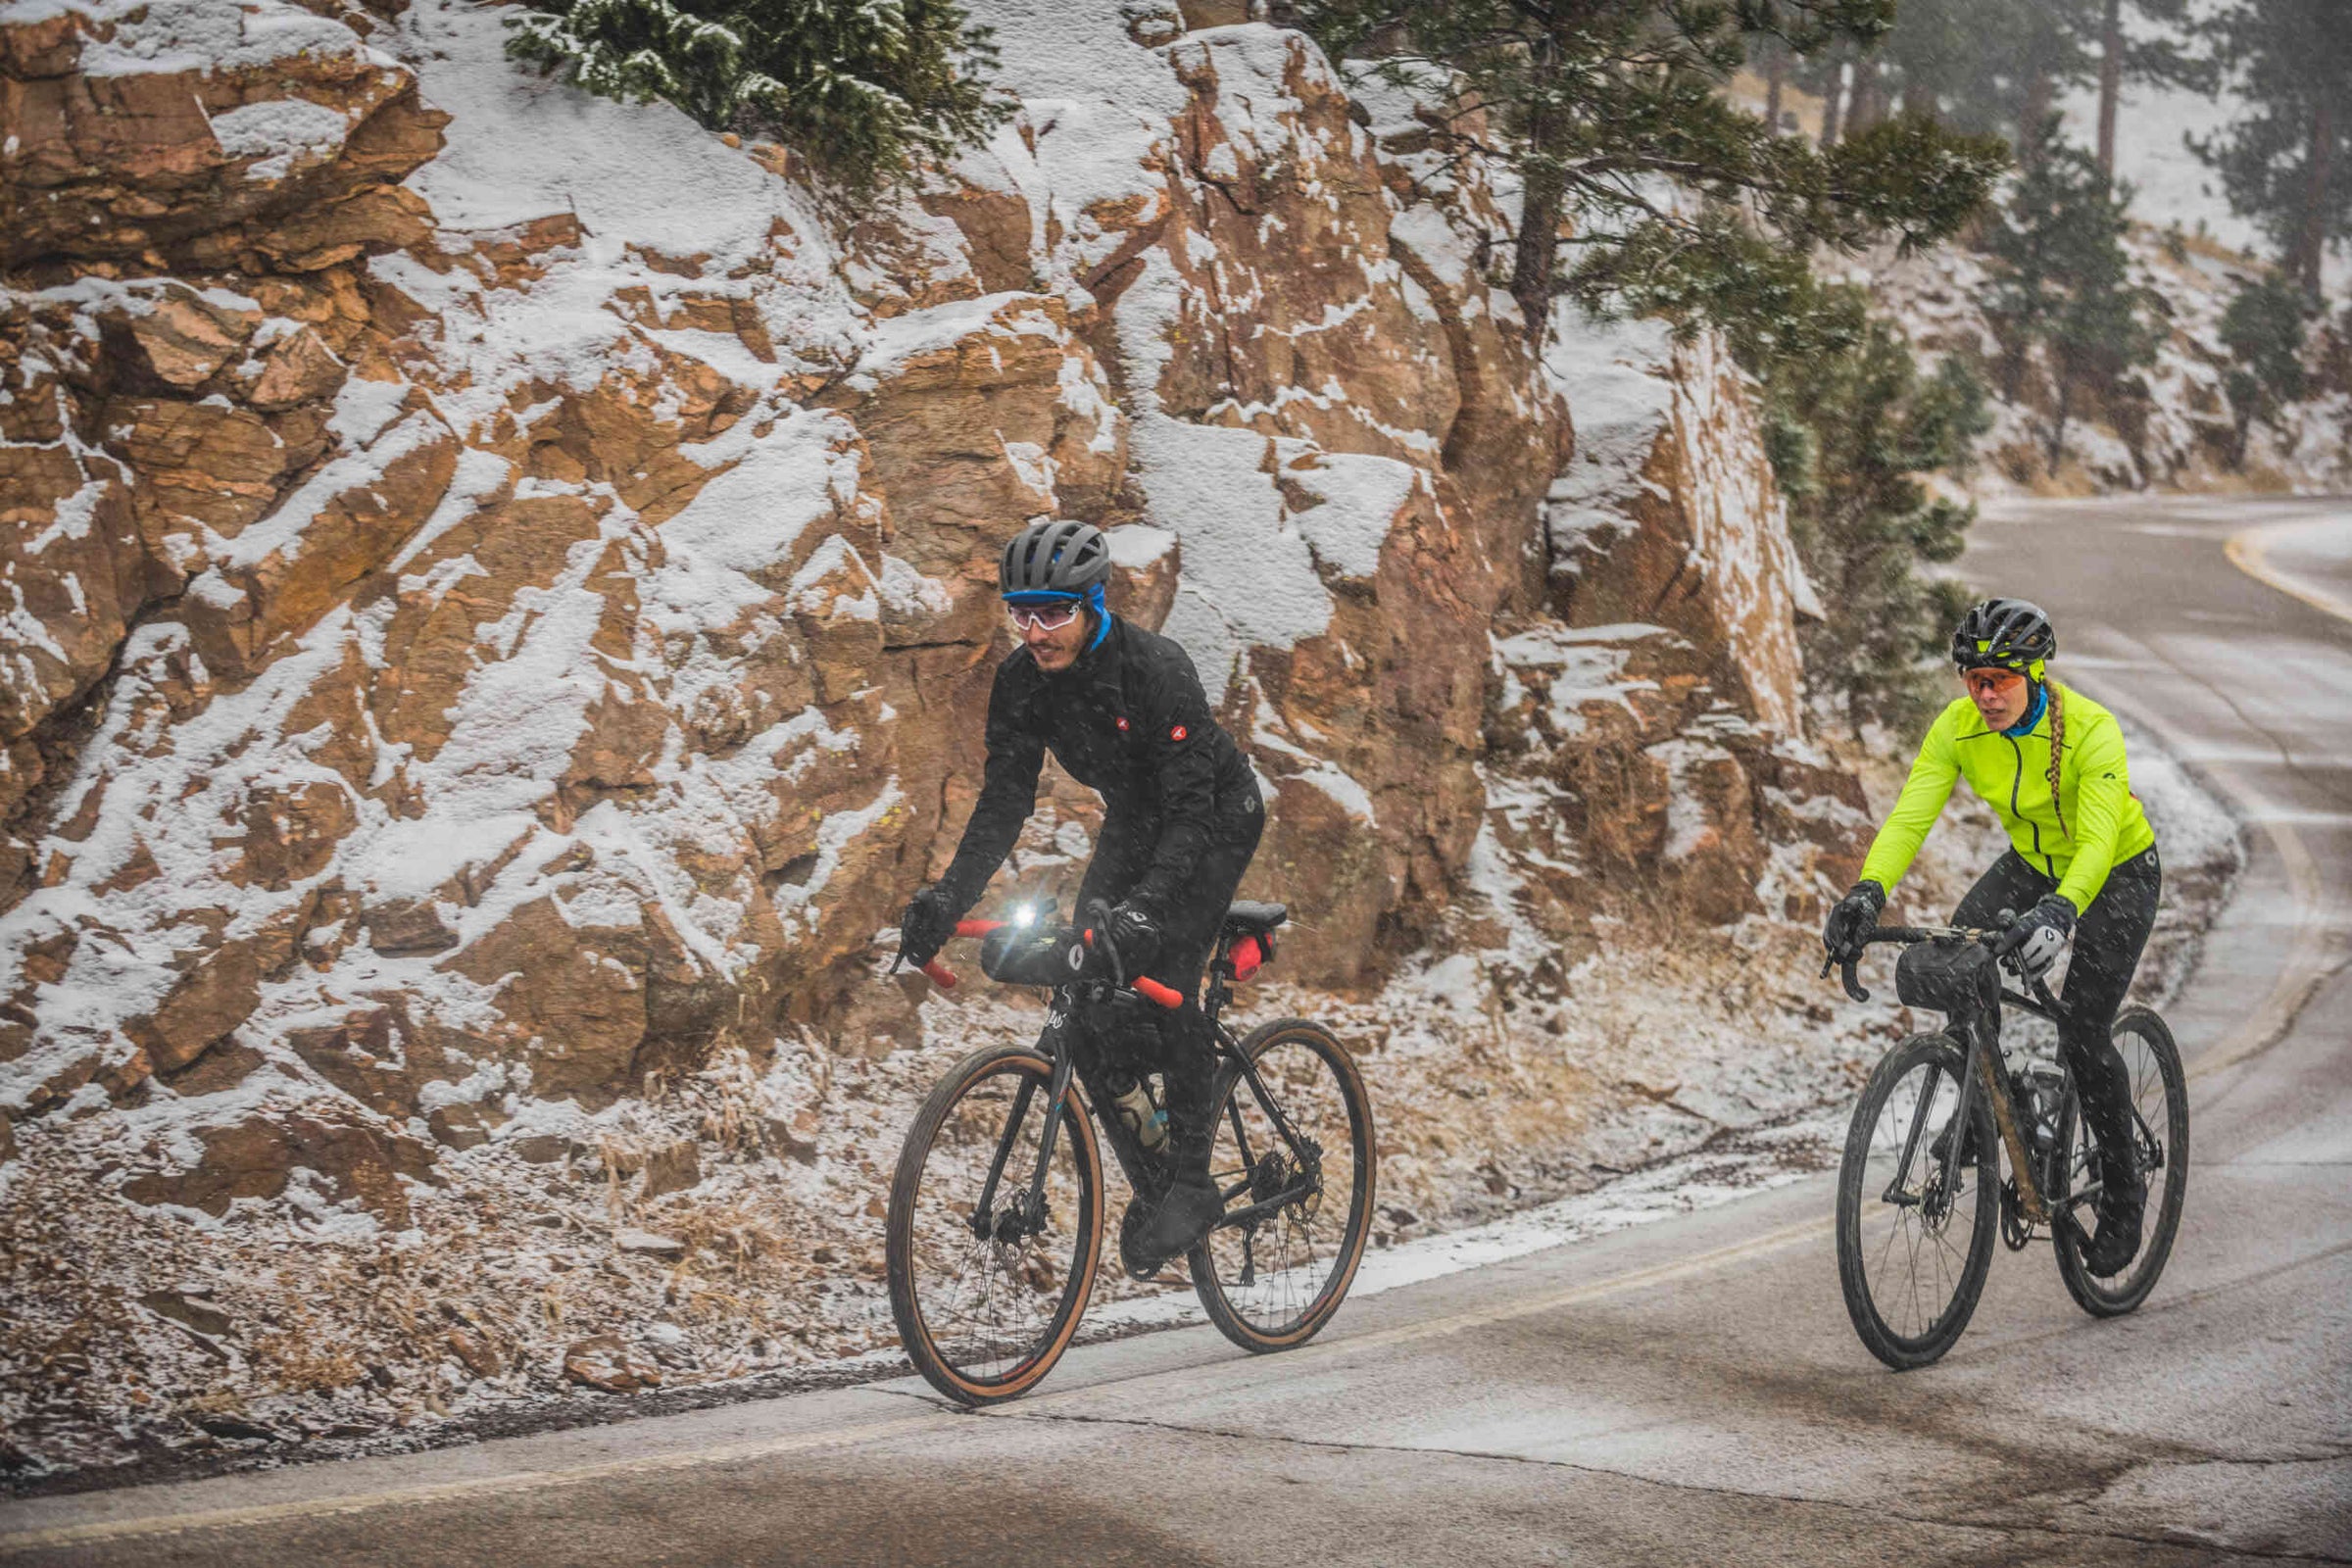 Winter Cycling Tips - 6 Things to Keep in Mind